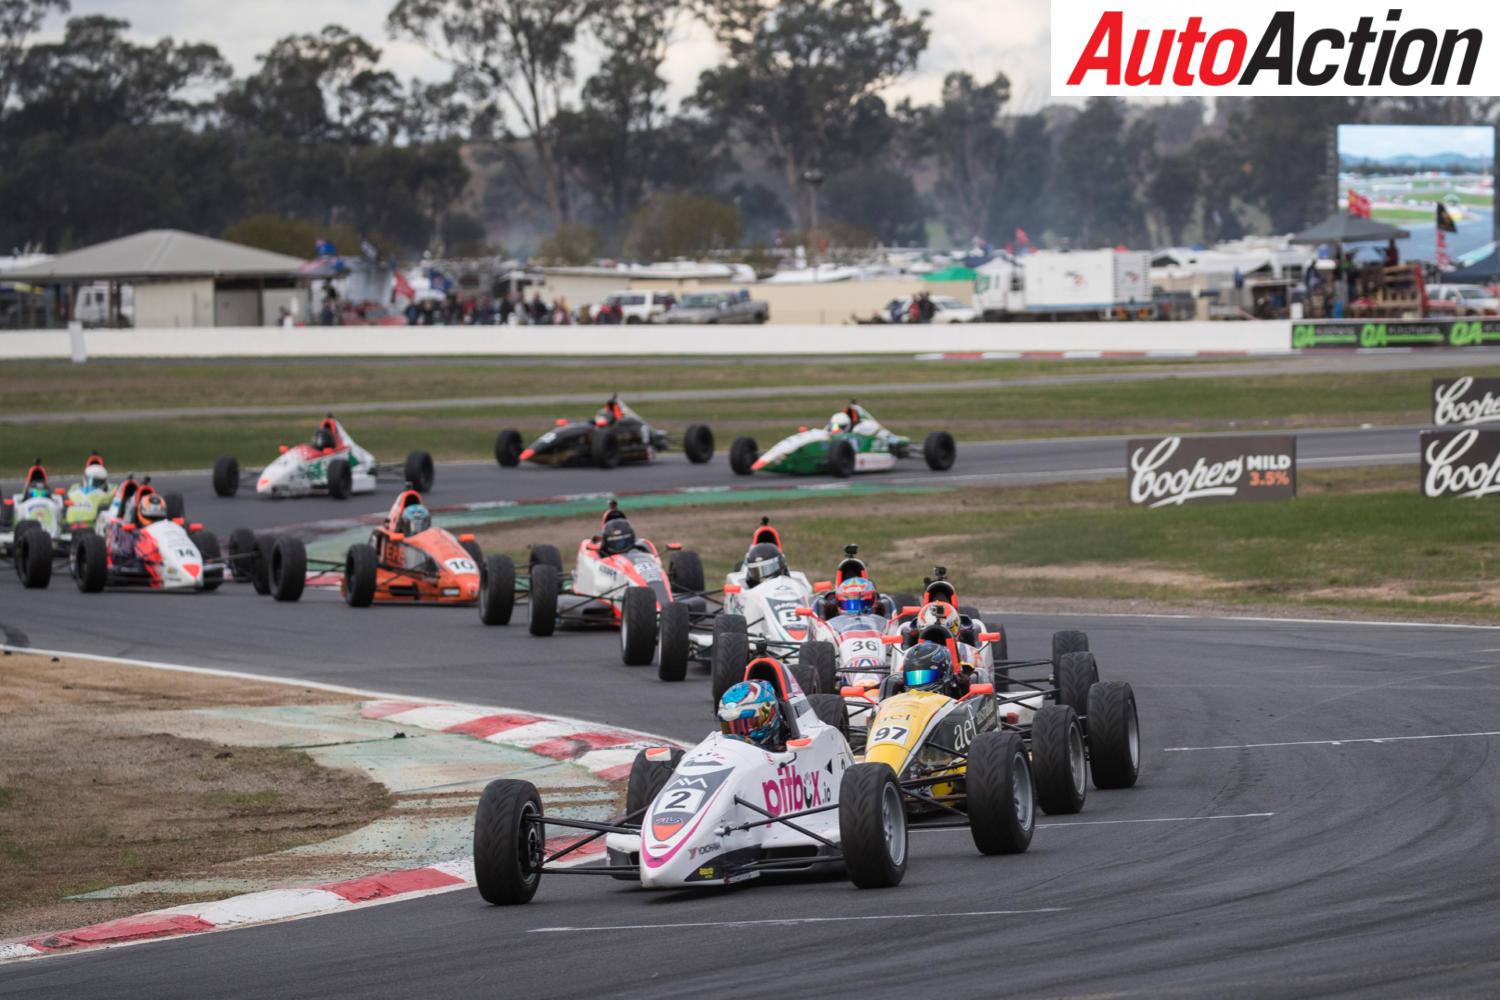 Multiple Formula Ford manufacturers now likely - Image: InSyde Media